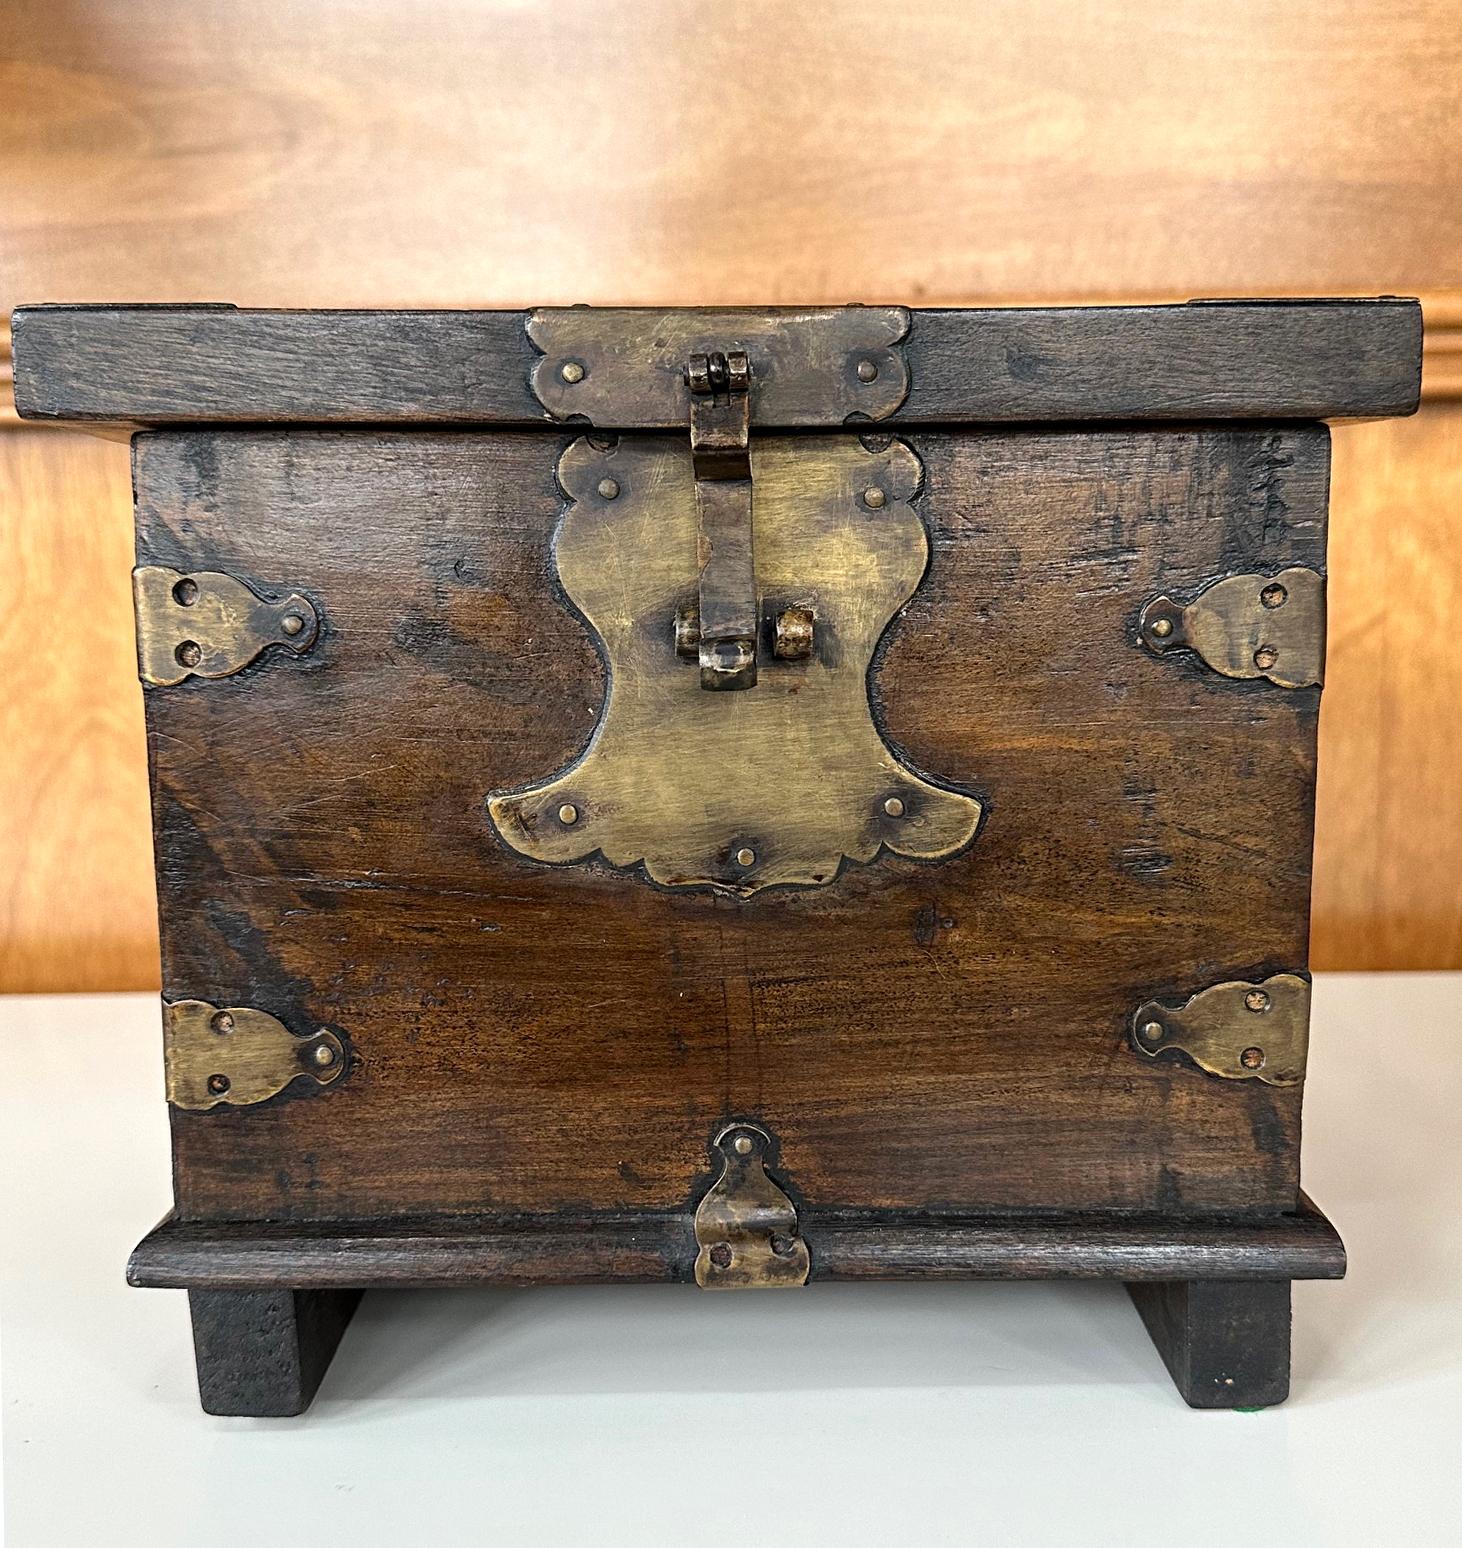 A small Korean antique box circa late 19th century of Joseon Dynasty. The square form box was constructed with thick hardwood planks on all side (appears to be elm) with a noticeable top with overhang and two long block base supports. It is fitted